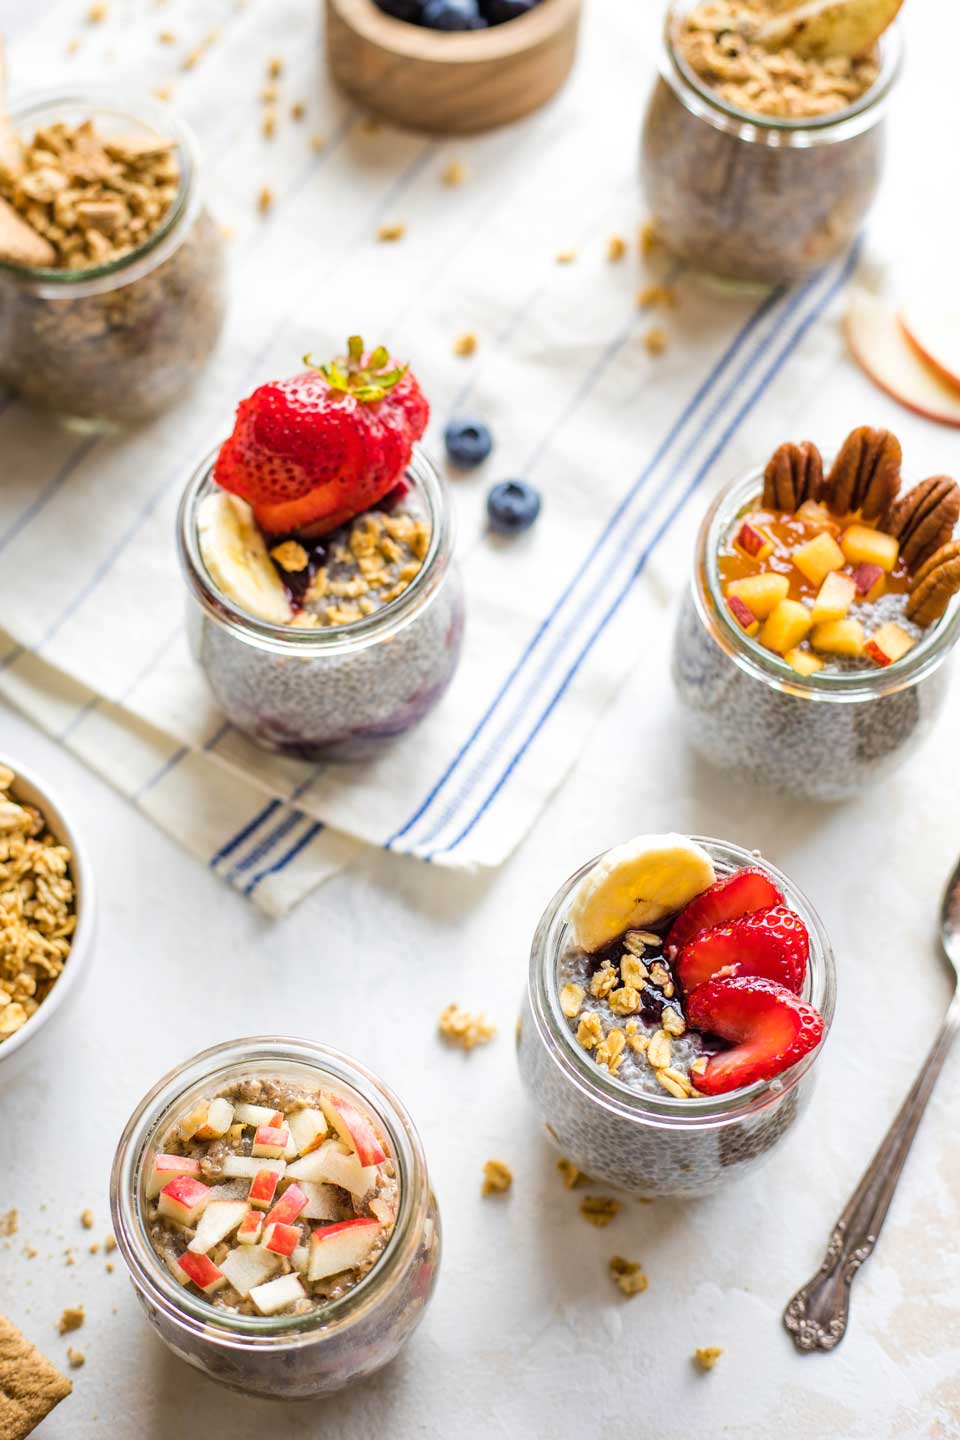 Several small serving jars of Chia Seed Pudding, with various toppings and mix-ins to show possible recipe variations